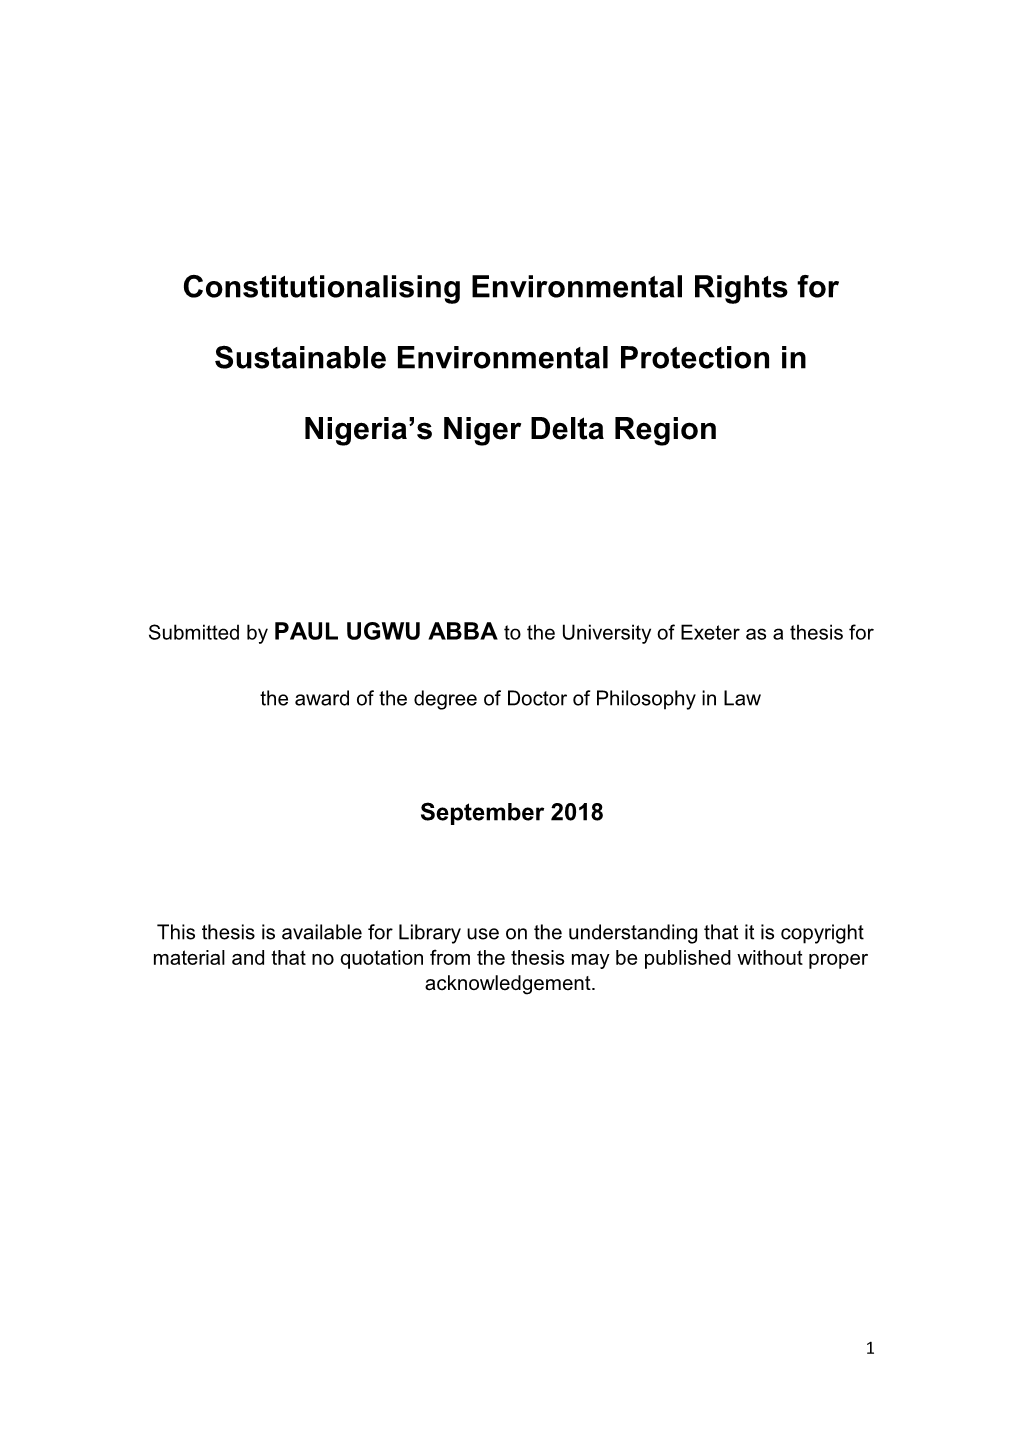 Constitutionalising Environmental Rights for Sustainable